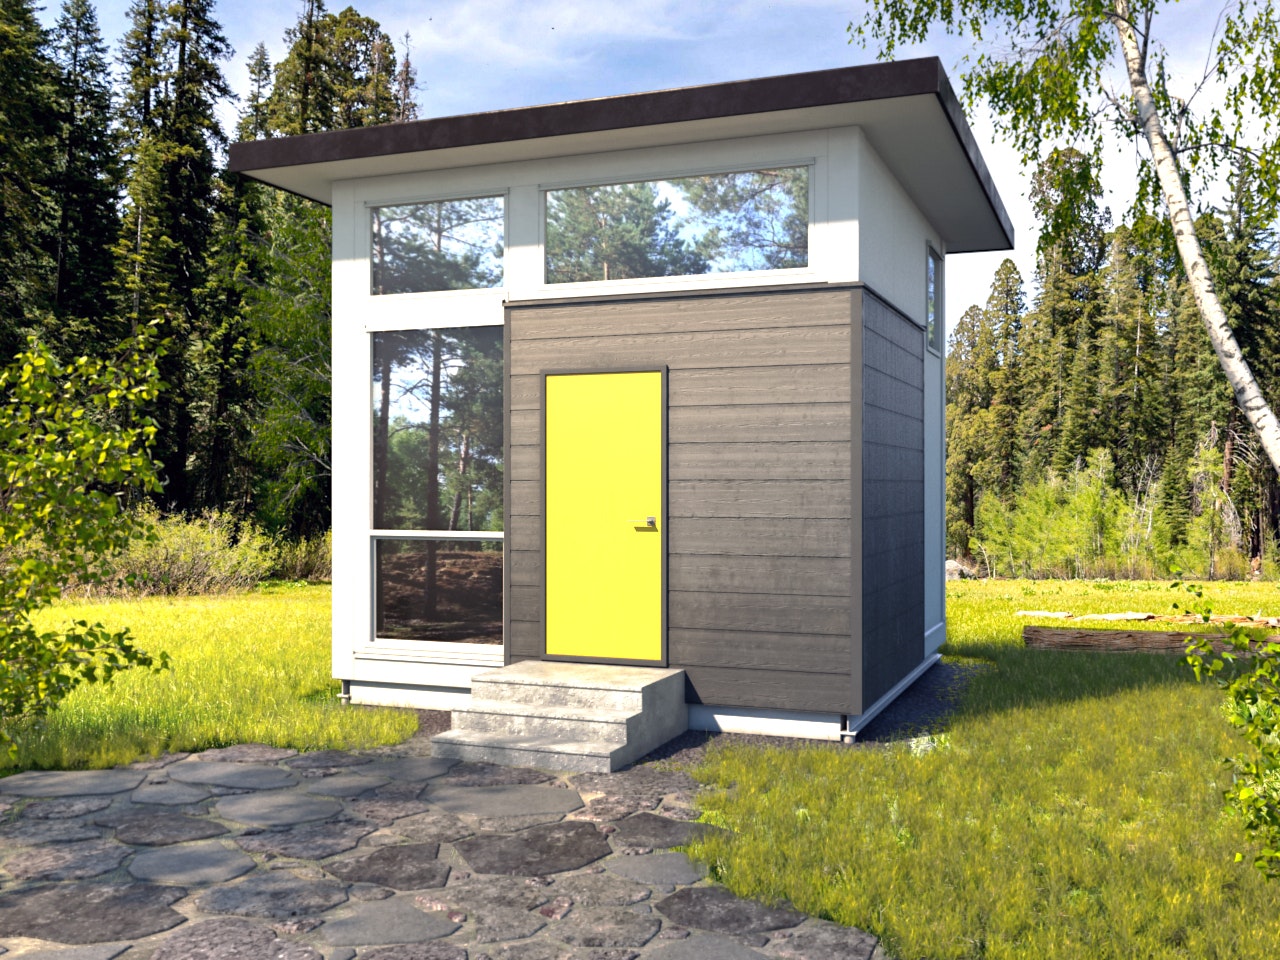 Sustainably built and affordable tiny house by NOMAD Micro Homes - Ecohome